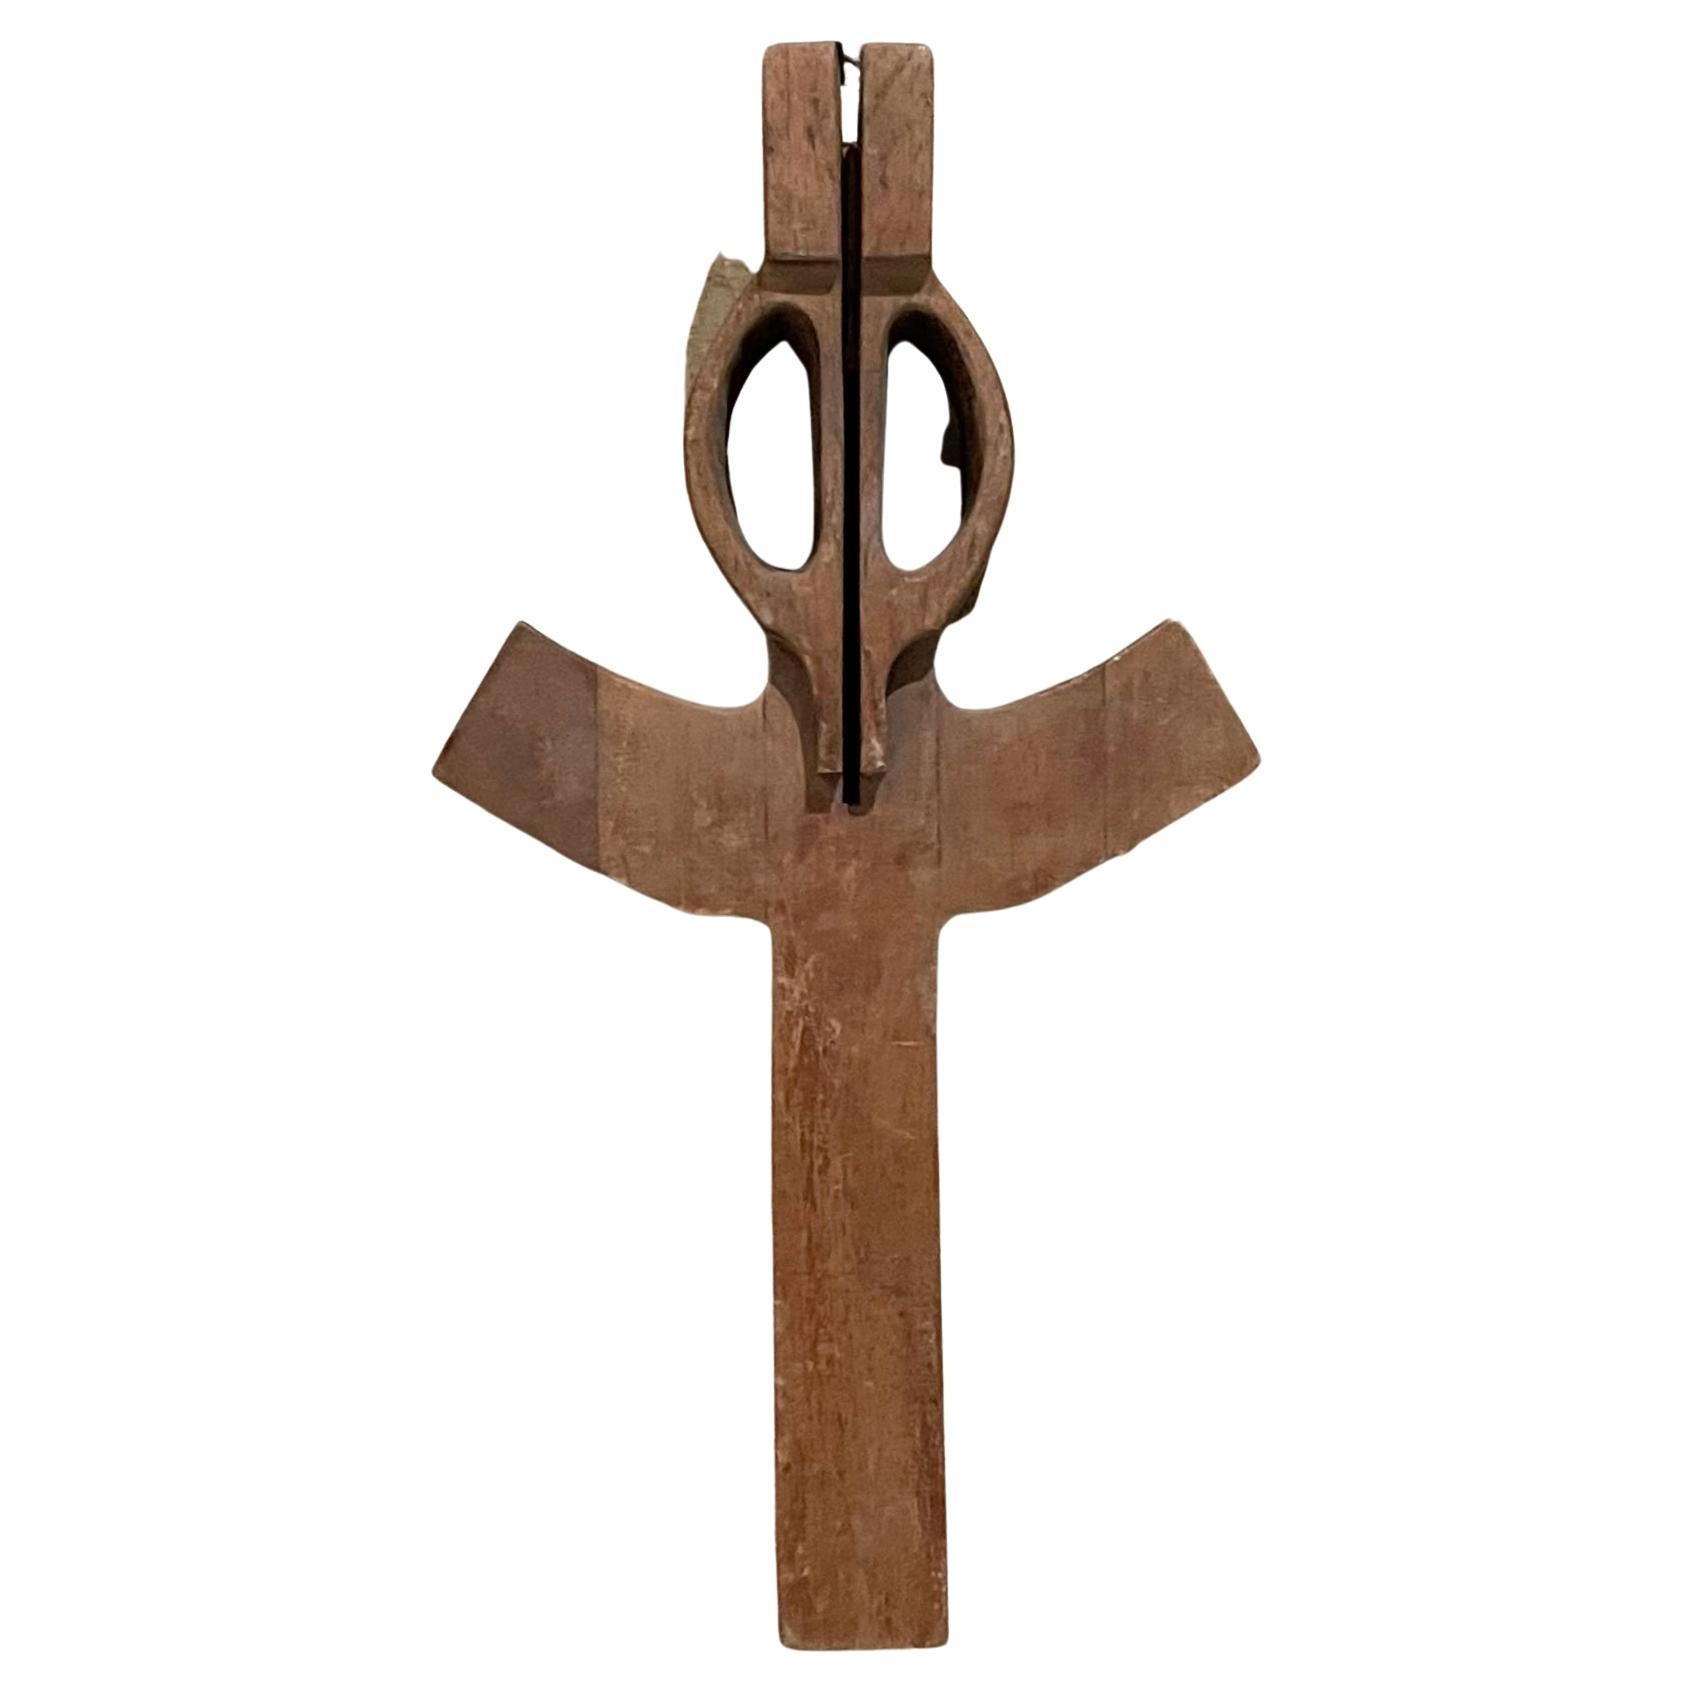 Modern mahogany cross
Style of Clara Porset Sculptural Wall Art Modern Cross in Thick Solid Mahogany Wood
Signed piece
15.5 h x 8 w x 2.5 inches
In original preowned unrestored fair vintage condition. Presentation has vintage appeal. Has wear